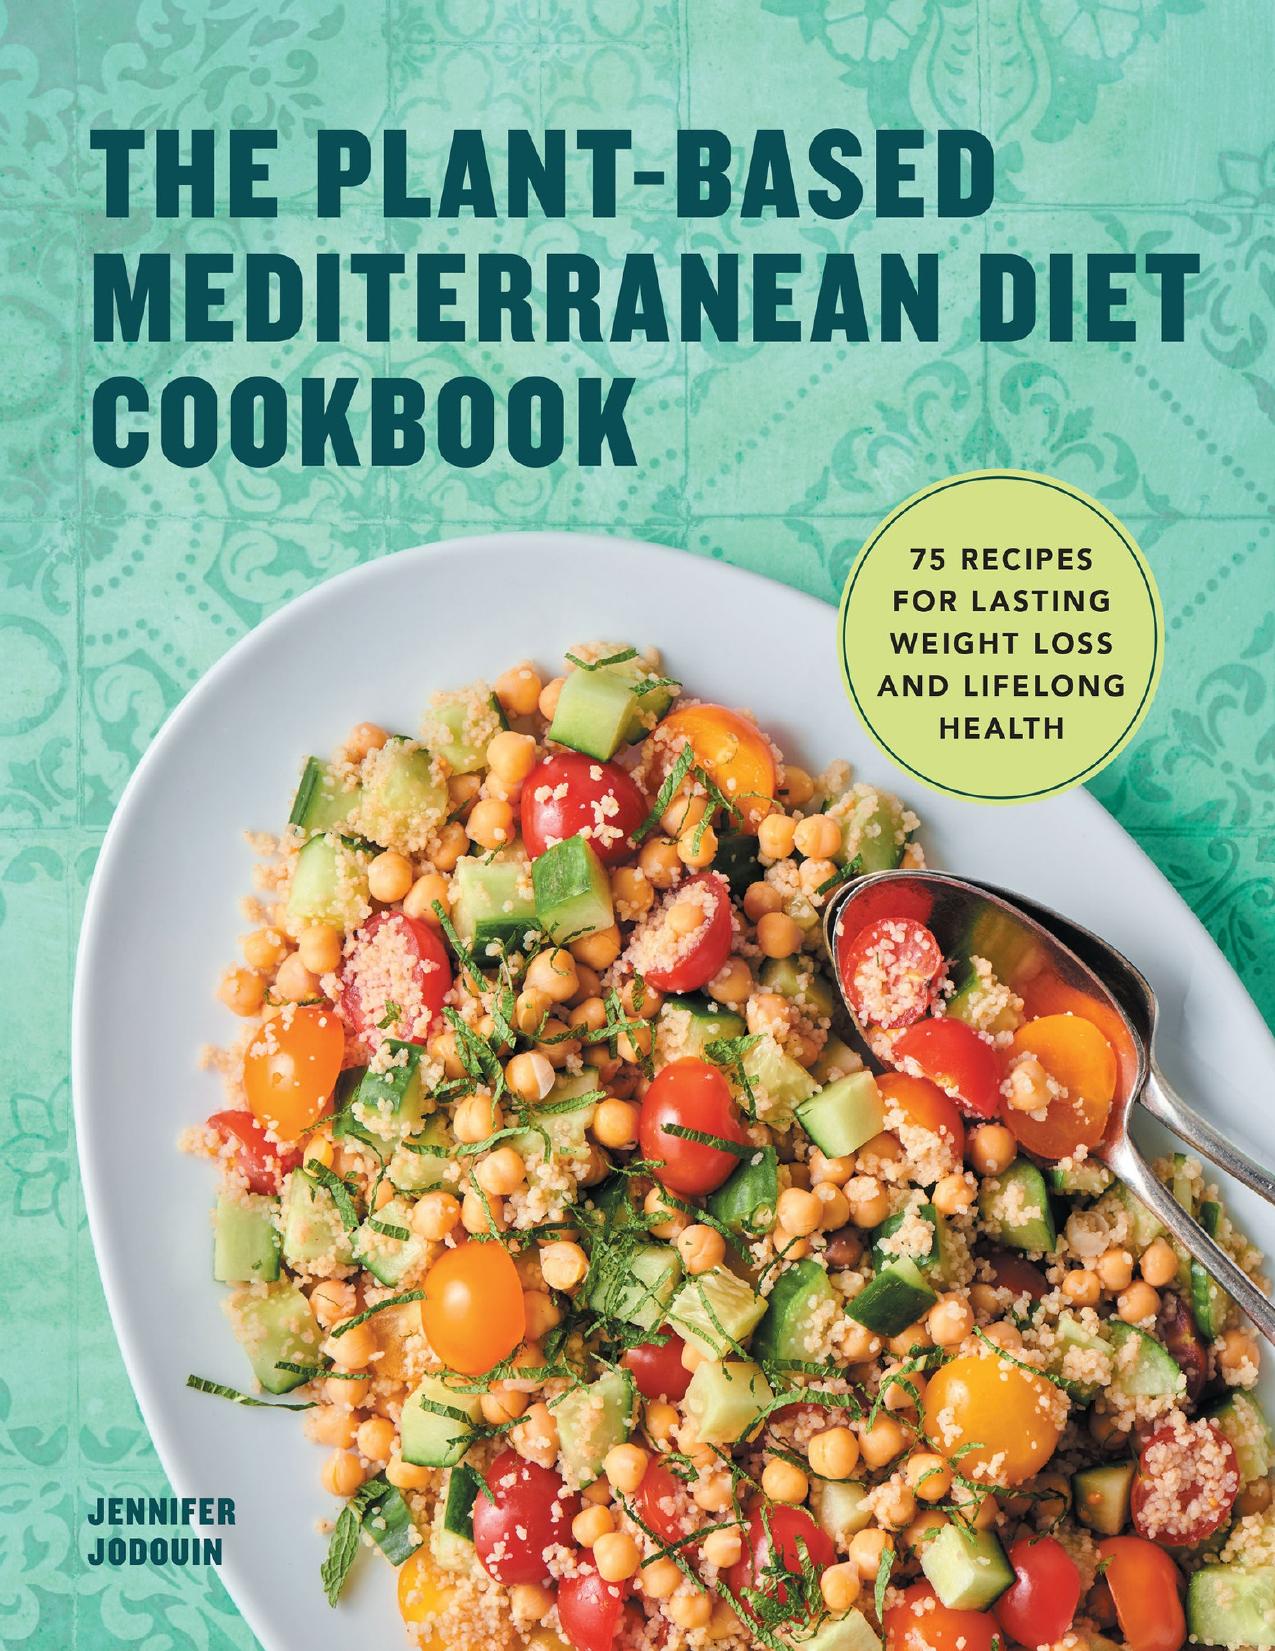 The Plant-Based Mediterranean Diet Cookbook: 75 Recipes for Lasting Weight Loss and Lifelong Health by Jodouin Jennifer